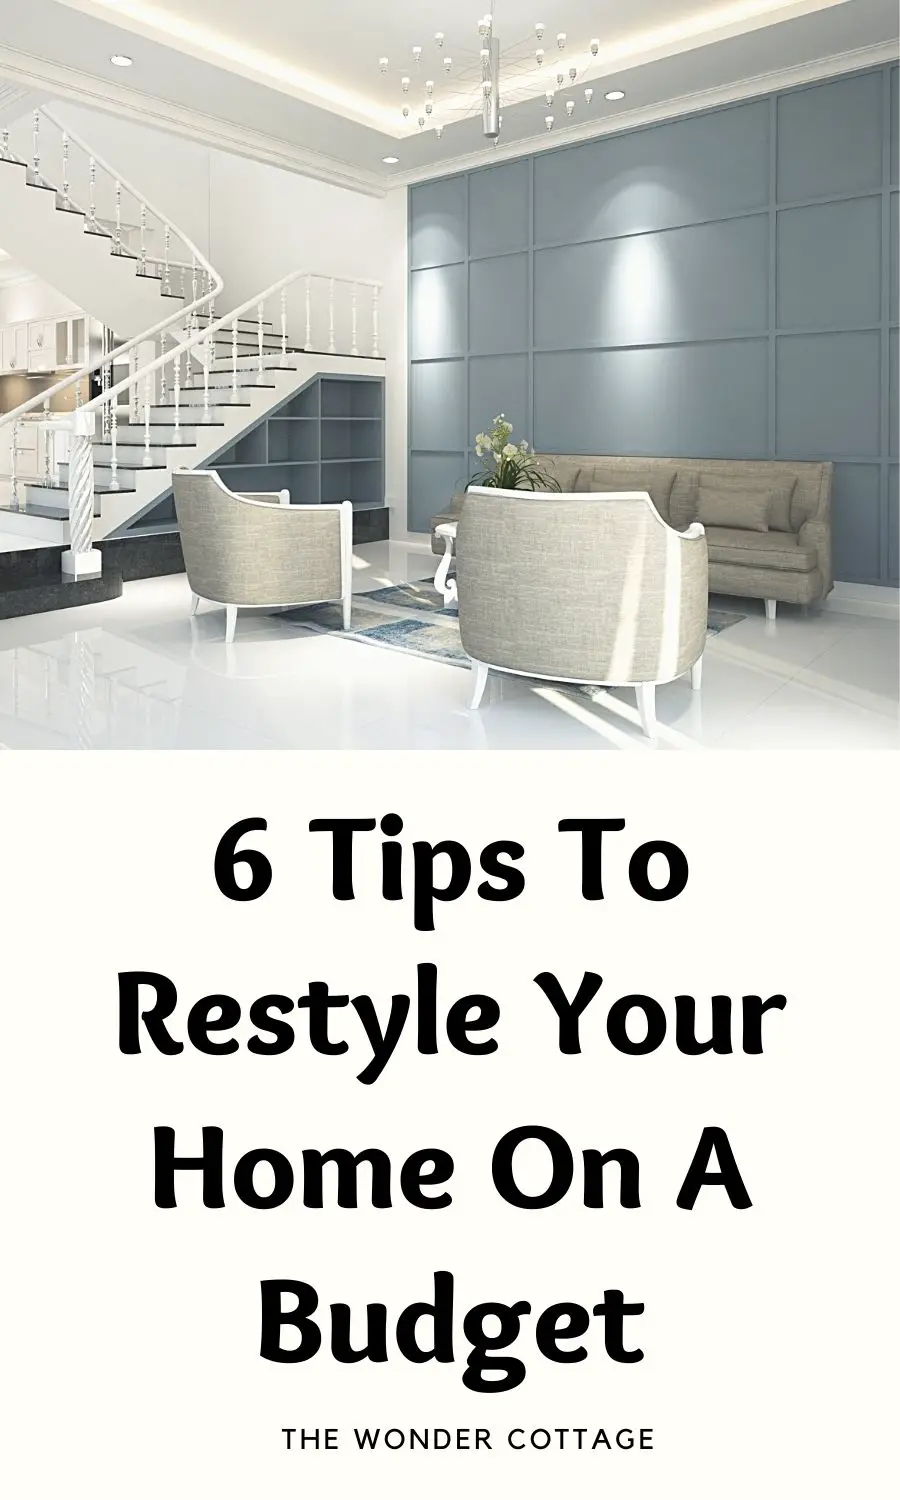 6 Tips To Restyle Your Home on a budget